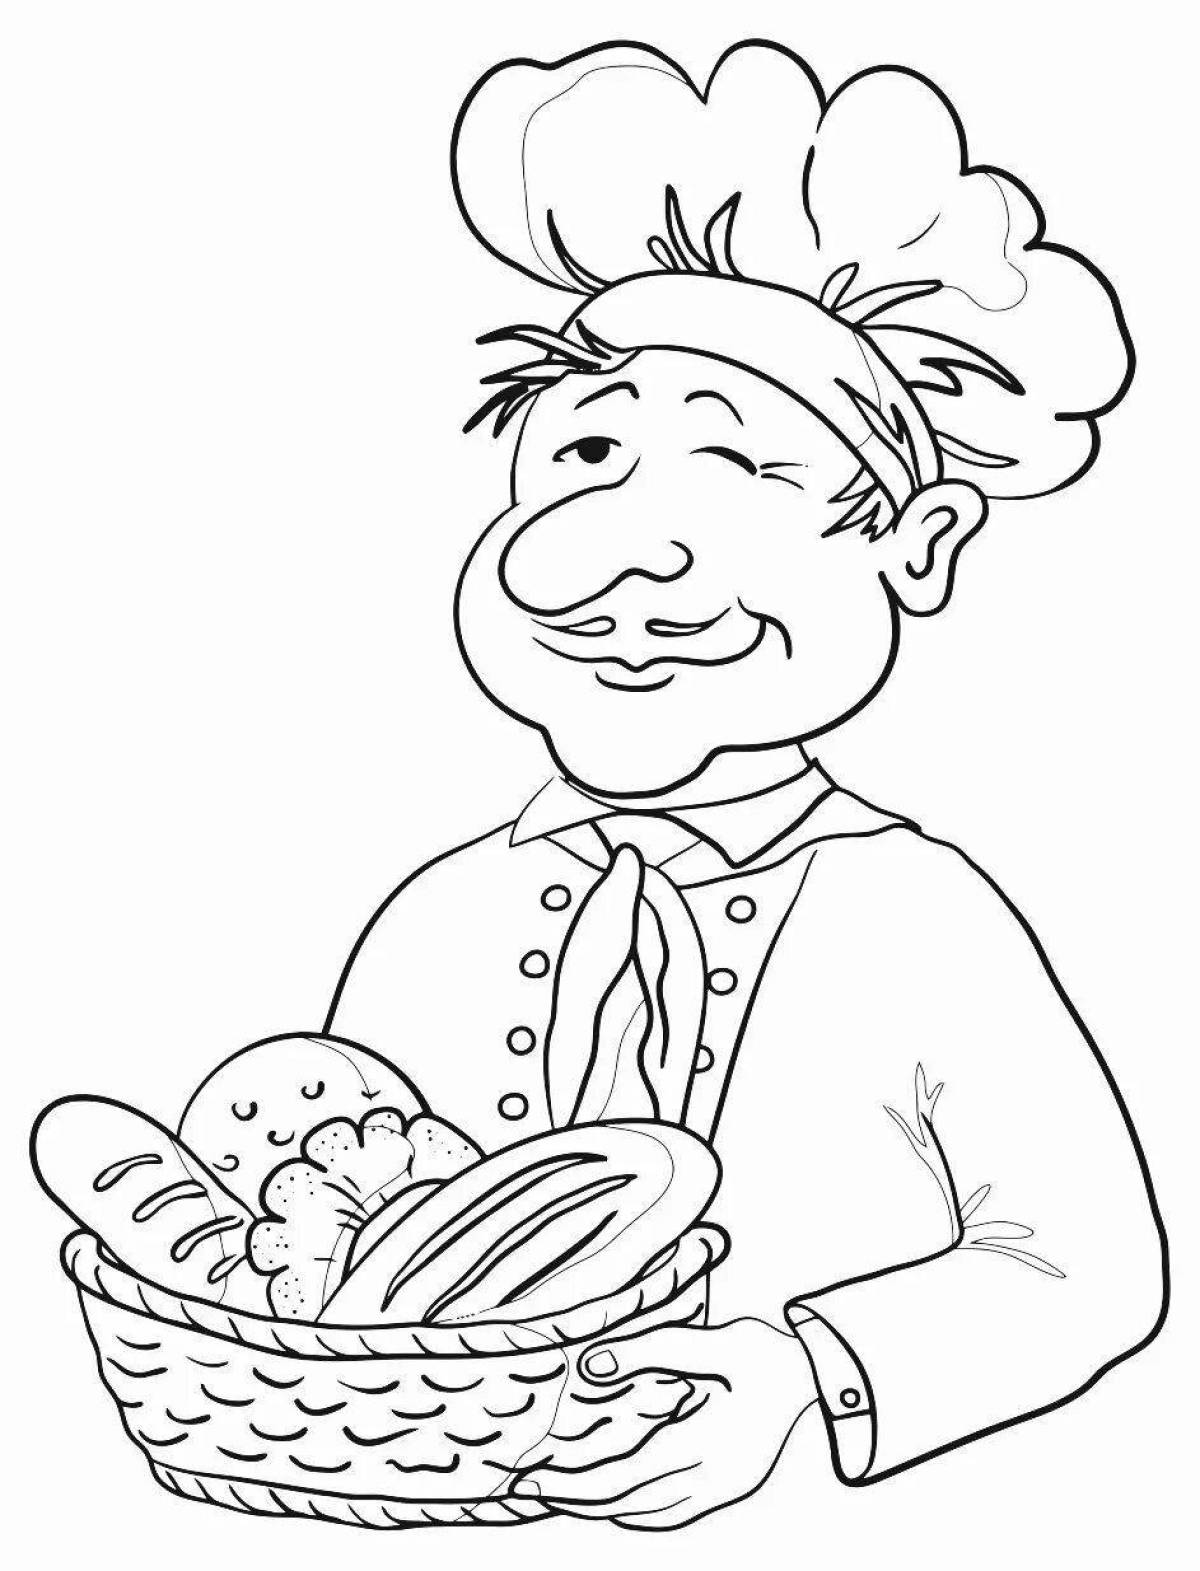 Sweetened bread coloring page